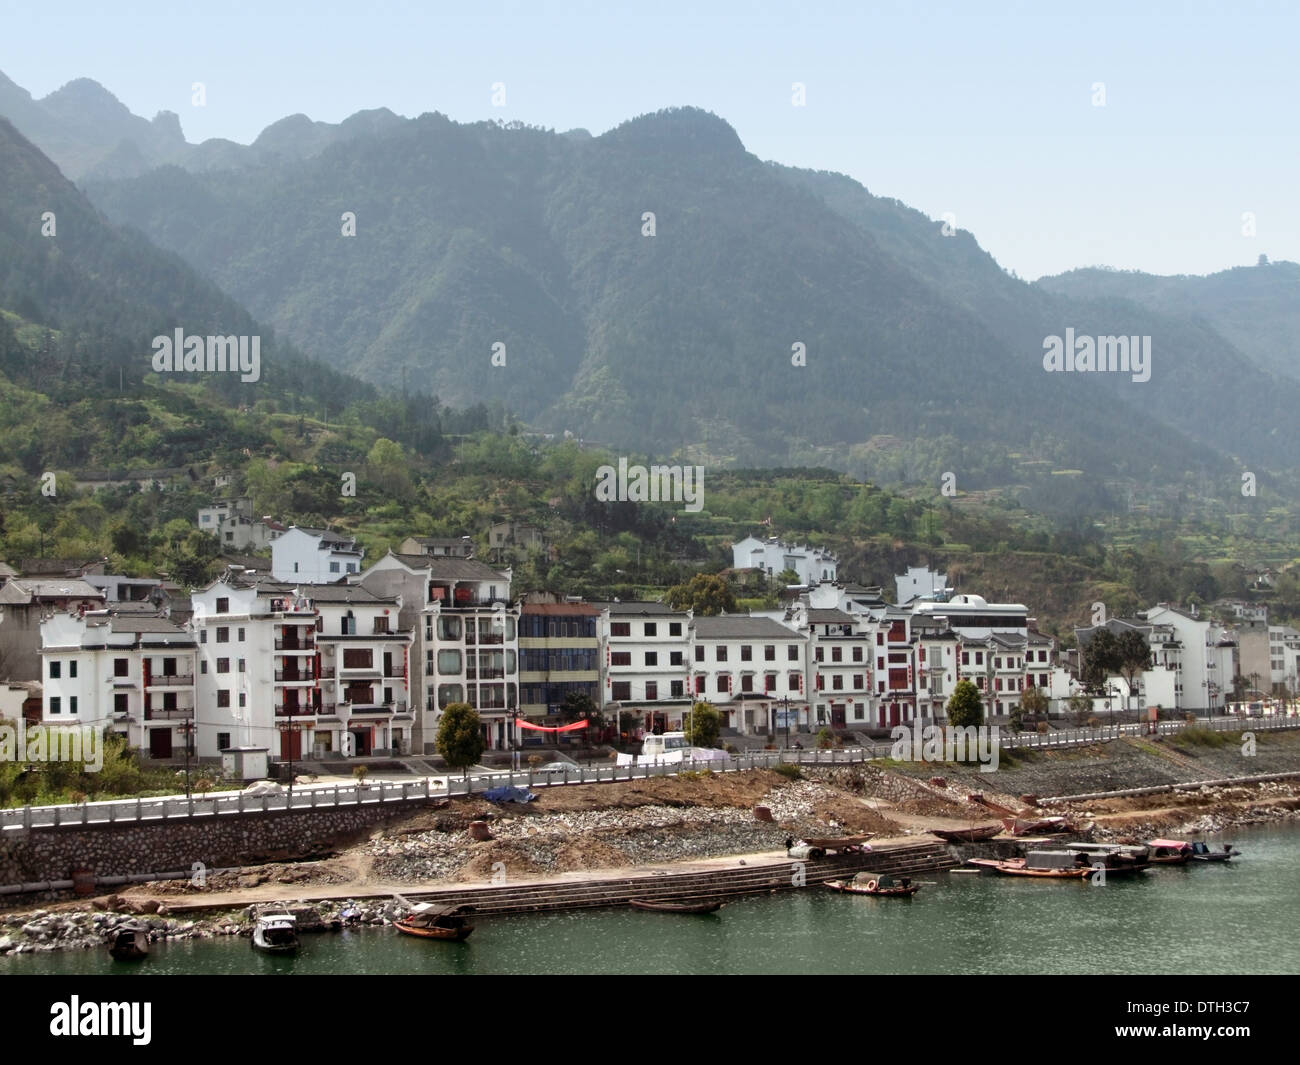 waterside scenery at the Yangtze River in China with houses and boats Stock Photo